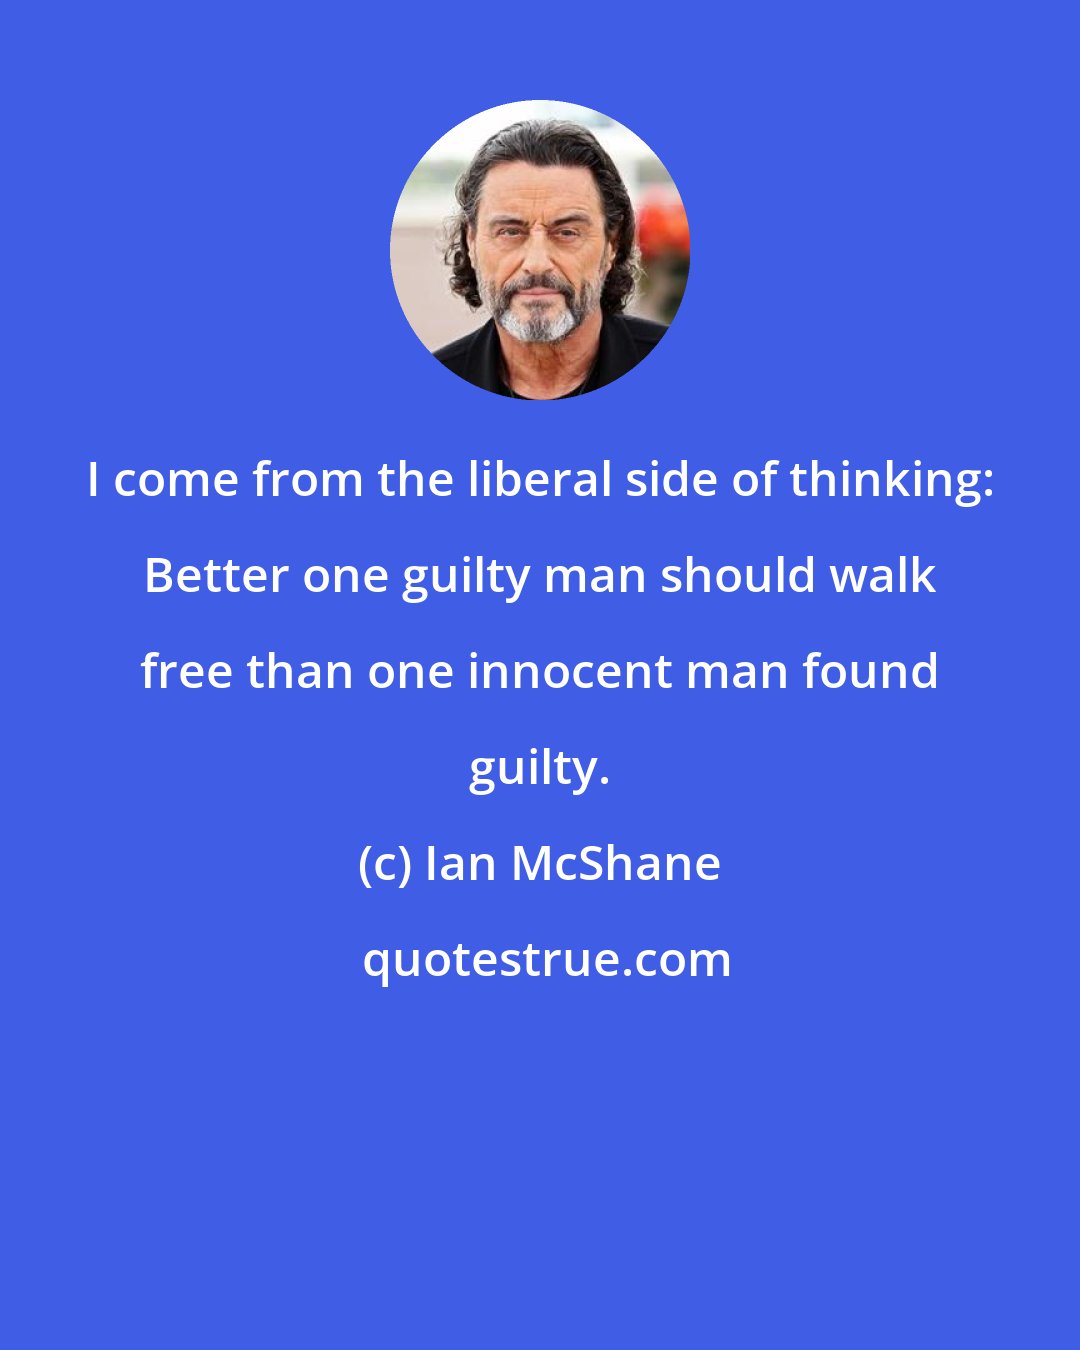 Ian McShane: I come from the liberal side of thinking: Better one guilty man should walk free than one innocent man found guilty.